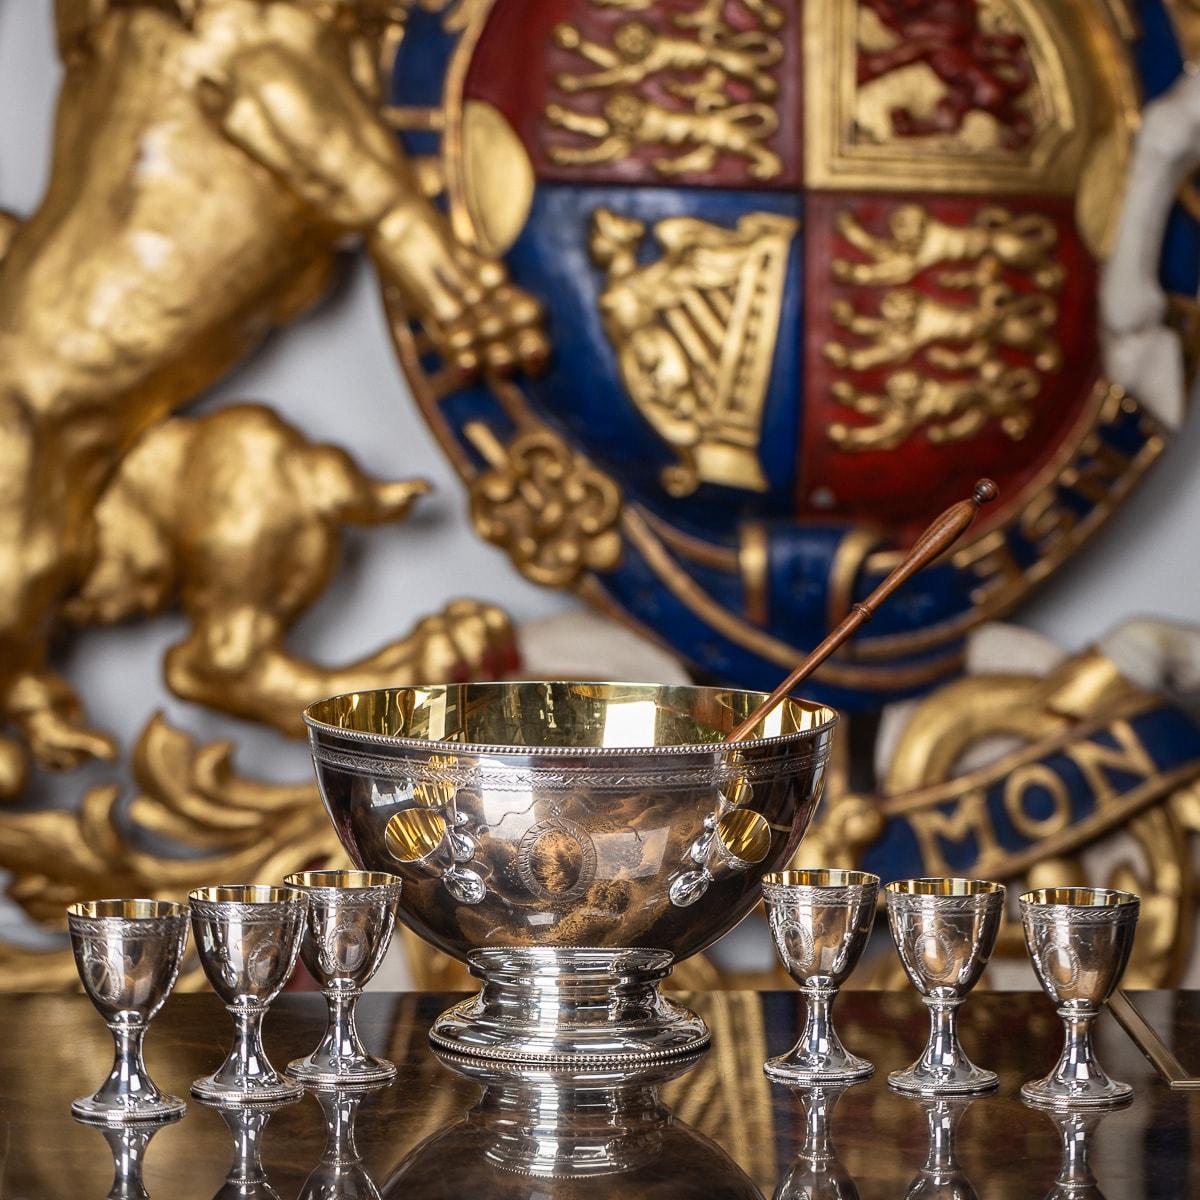 Superb 20th Century Elizabeth II solid silver punch set, consisting of a punch bowl, six goblets and a ladle, the circular bowl raised on a circular turned foot with beaded decoration along the rims, the side with three parallel bands of bright cut